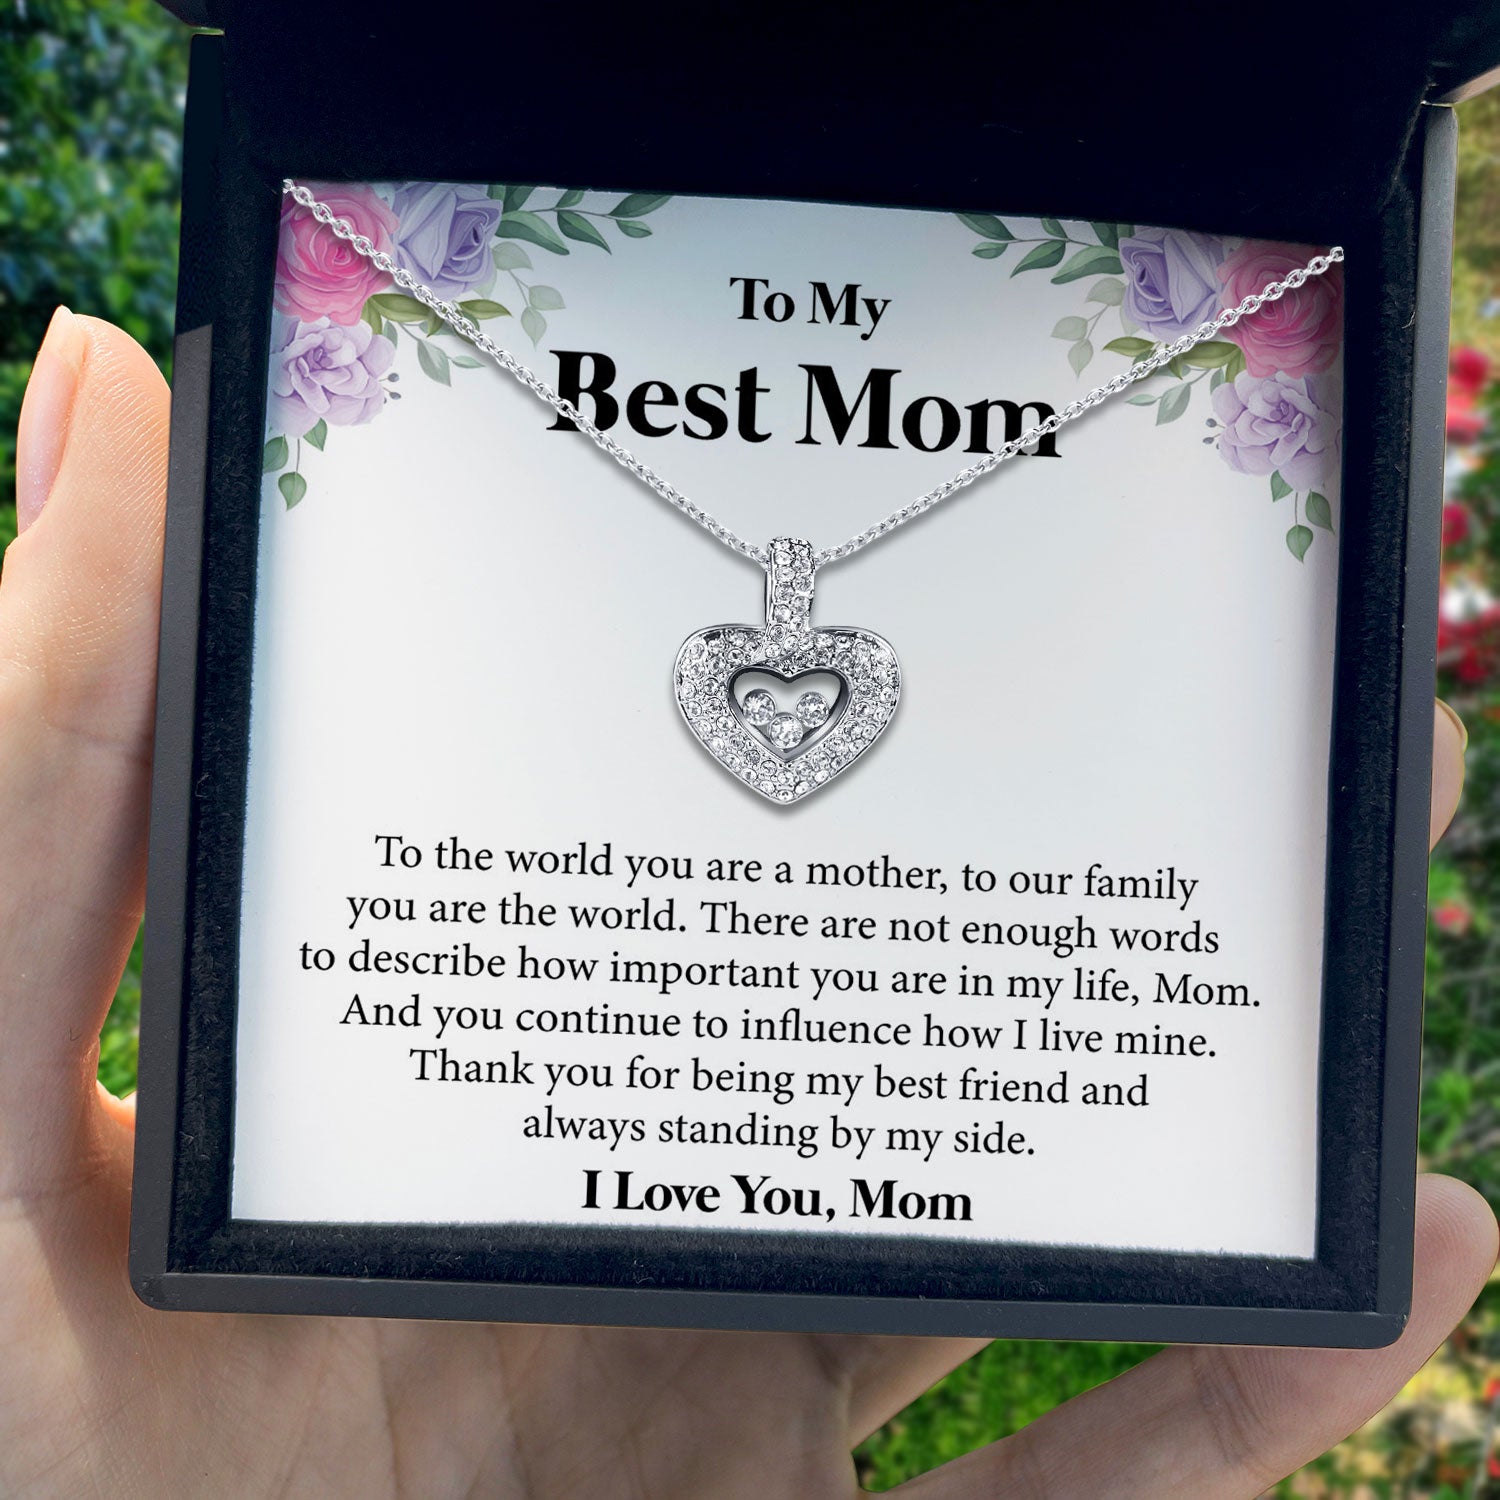 To My Best Mom - Thank You For Being My Best Friend - Tryndi Floating Heart Necklace